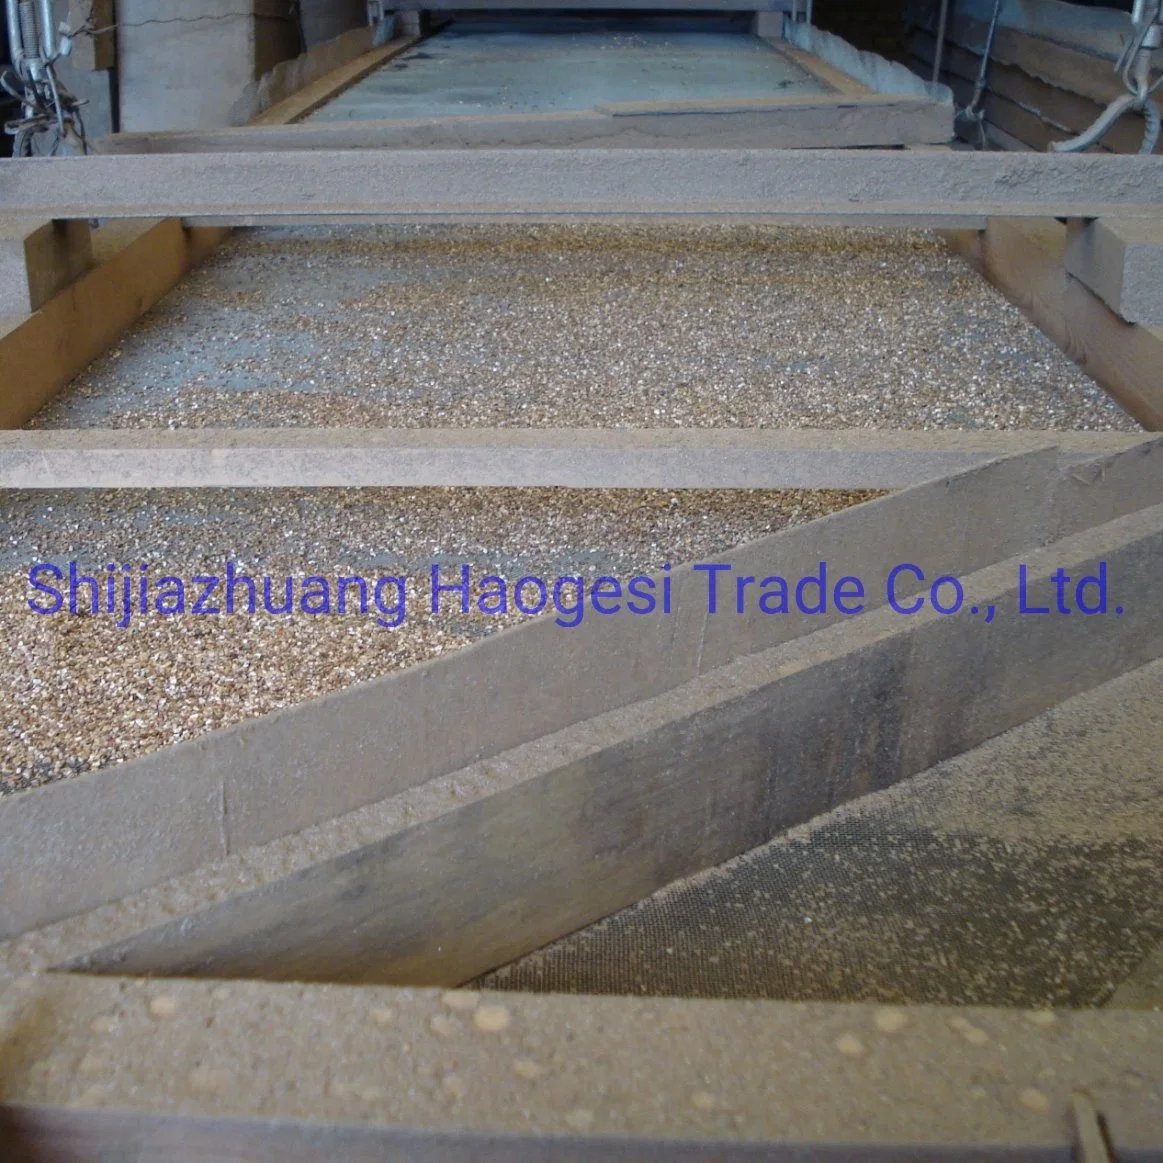 Foundries and Fireproofing Construction Coatings Used Gold Silver Expaned Vermiculite Plasters Vermiculite